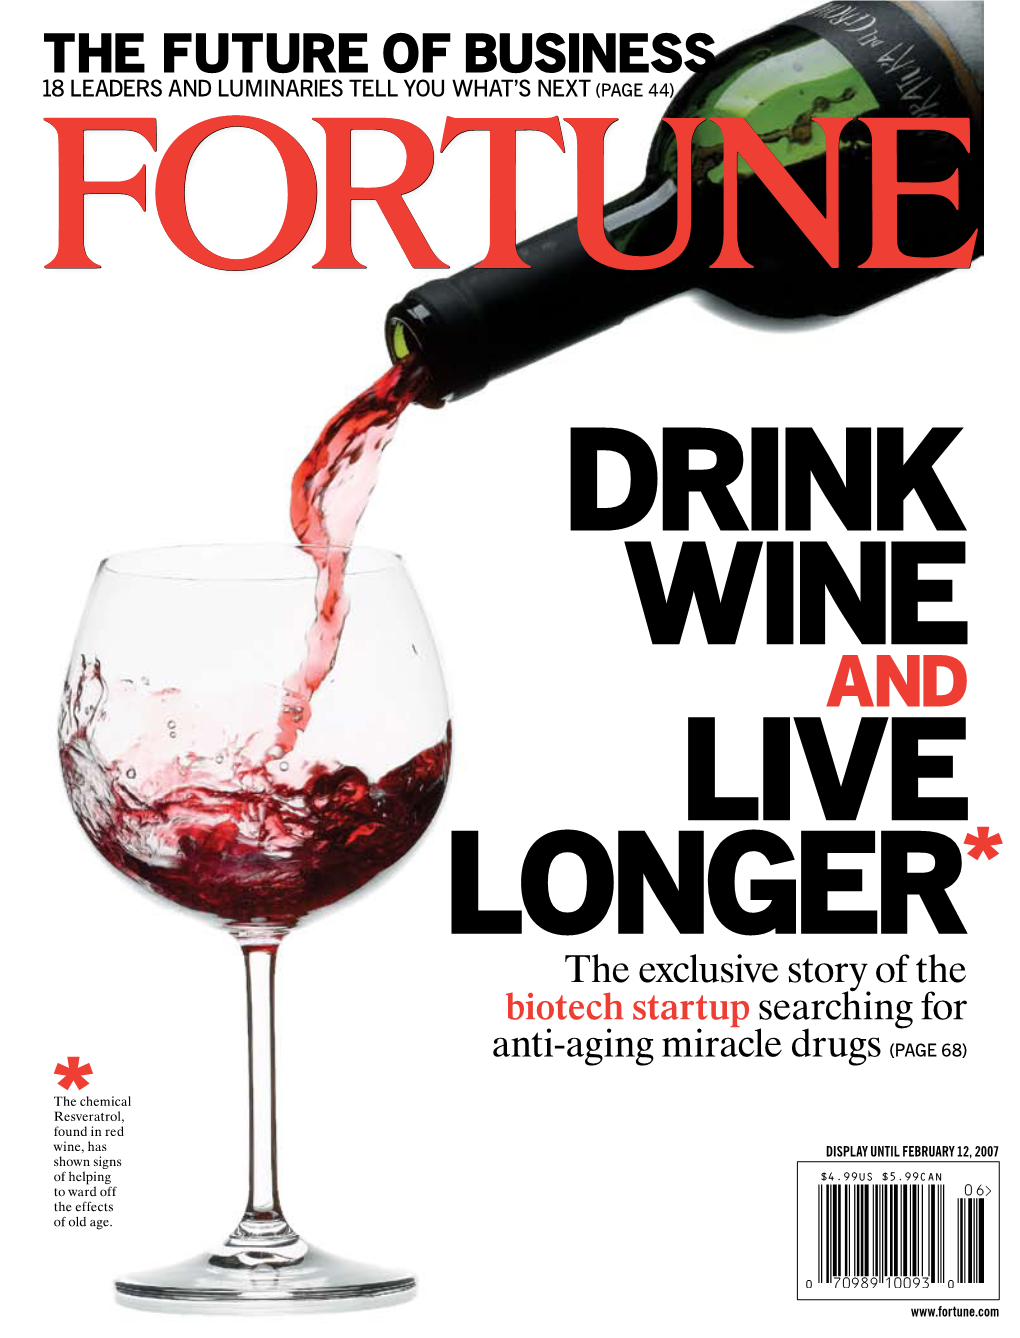 The Exclusive Story of the Biotech Startup Searching for Anti-Aging Miracle Drugs (Page 68)